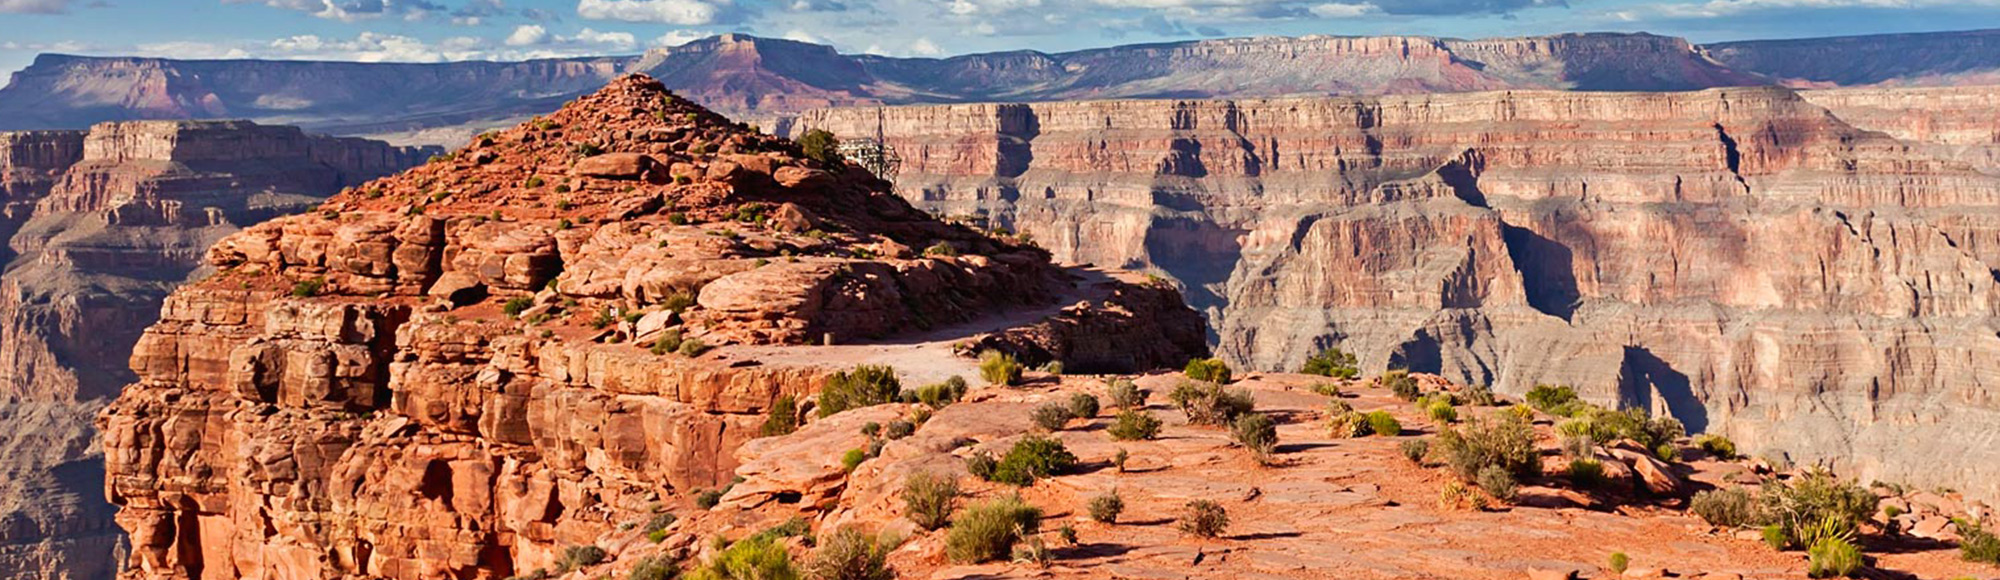 Grand Canyon Experience with Skywalk tour